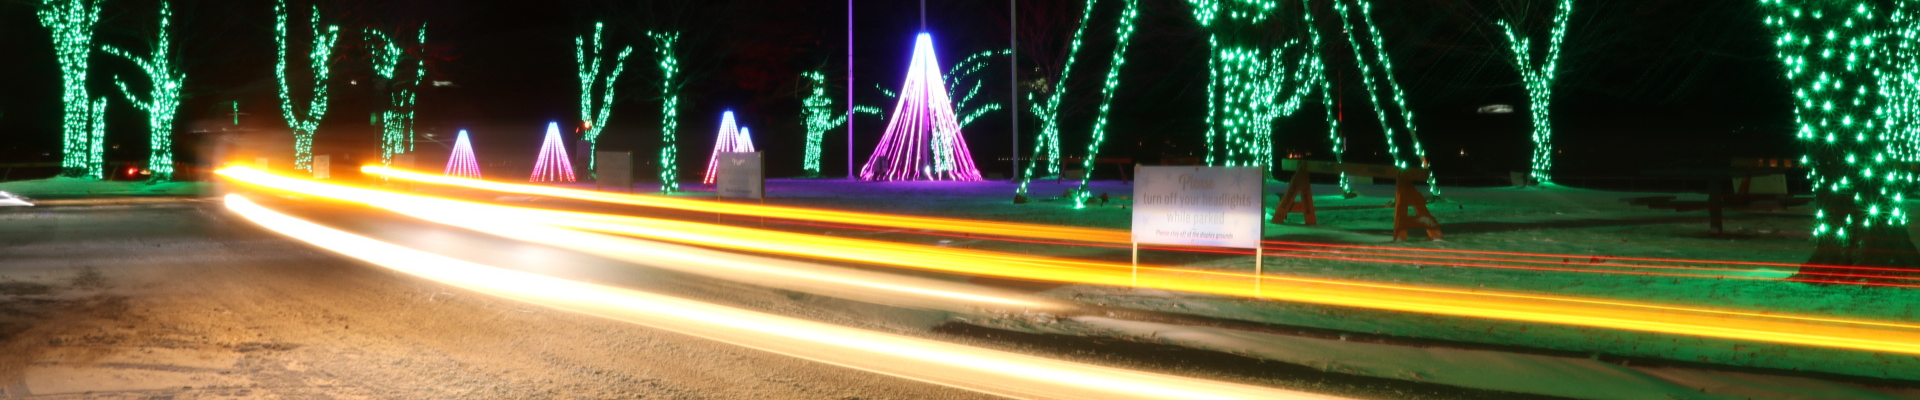 Light trail photograph of a car passing by the trees on blockhouse island lit up with christmas lights during the River of Lights in Brockville